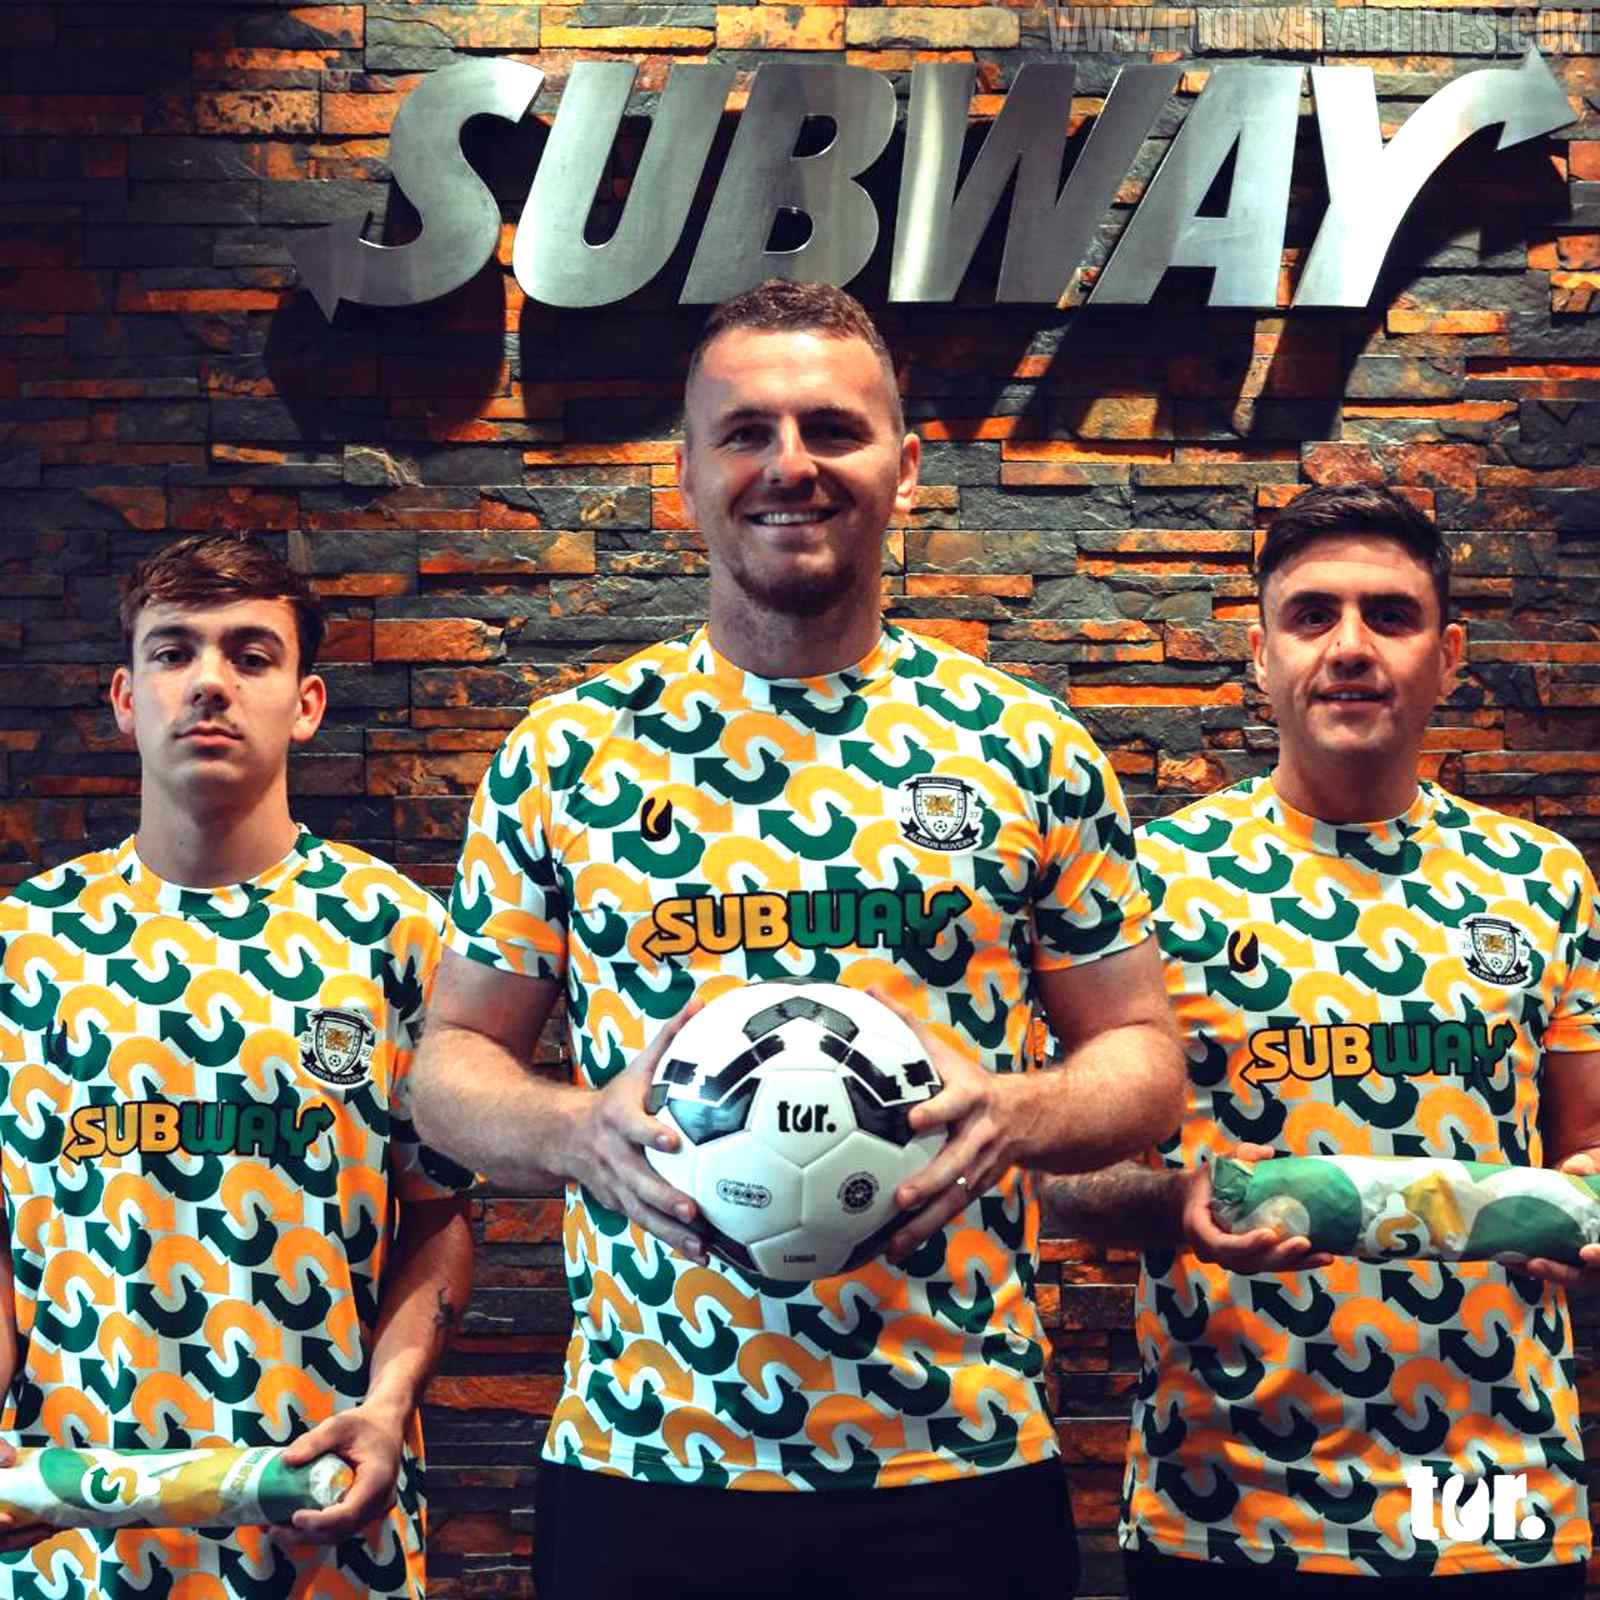 albion rovers subway kit